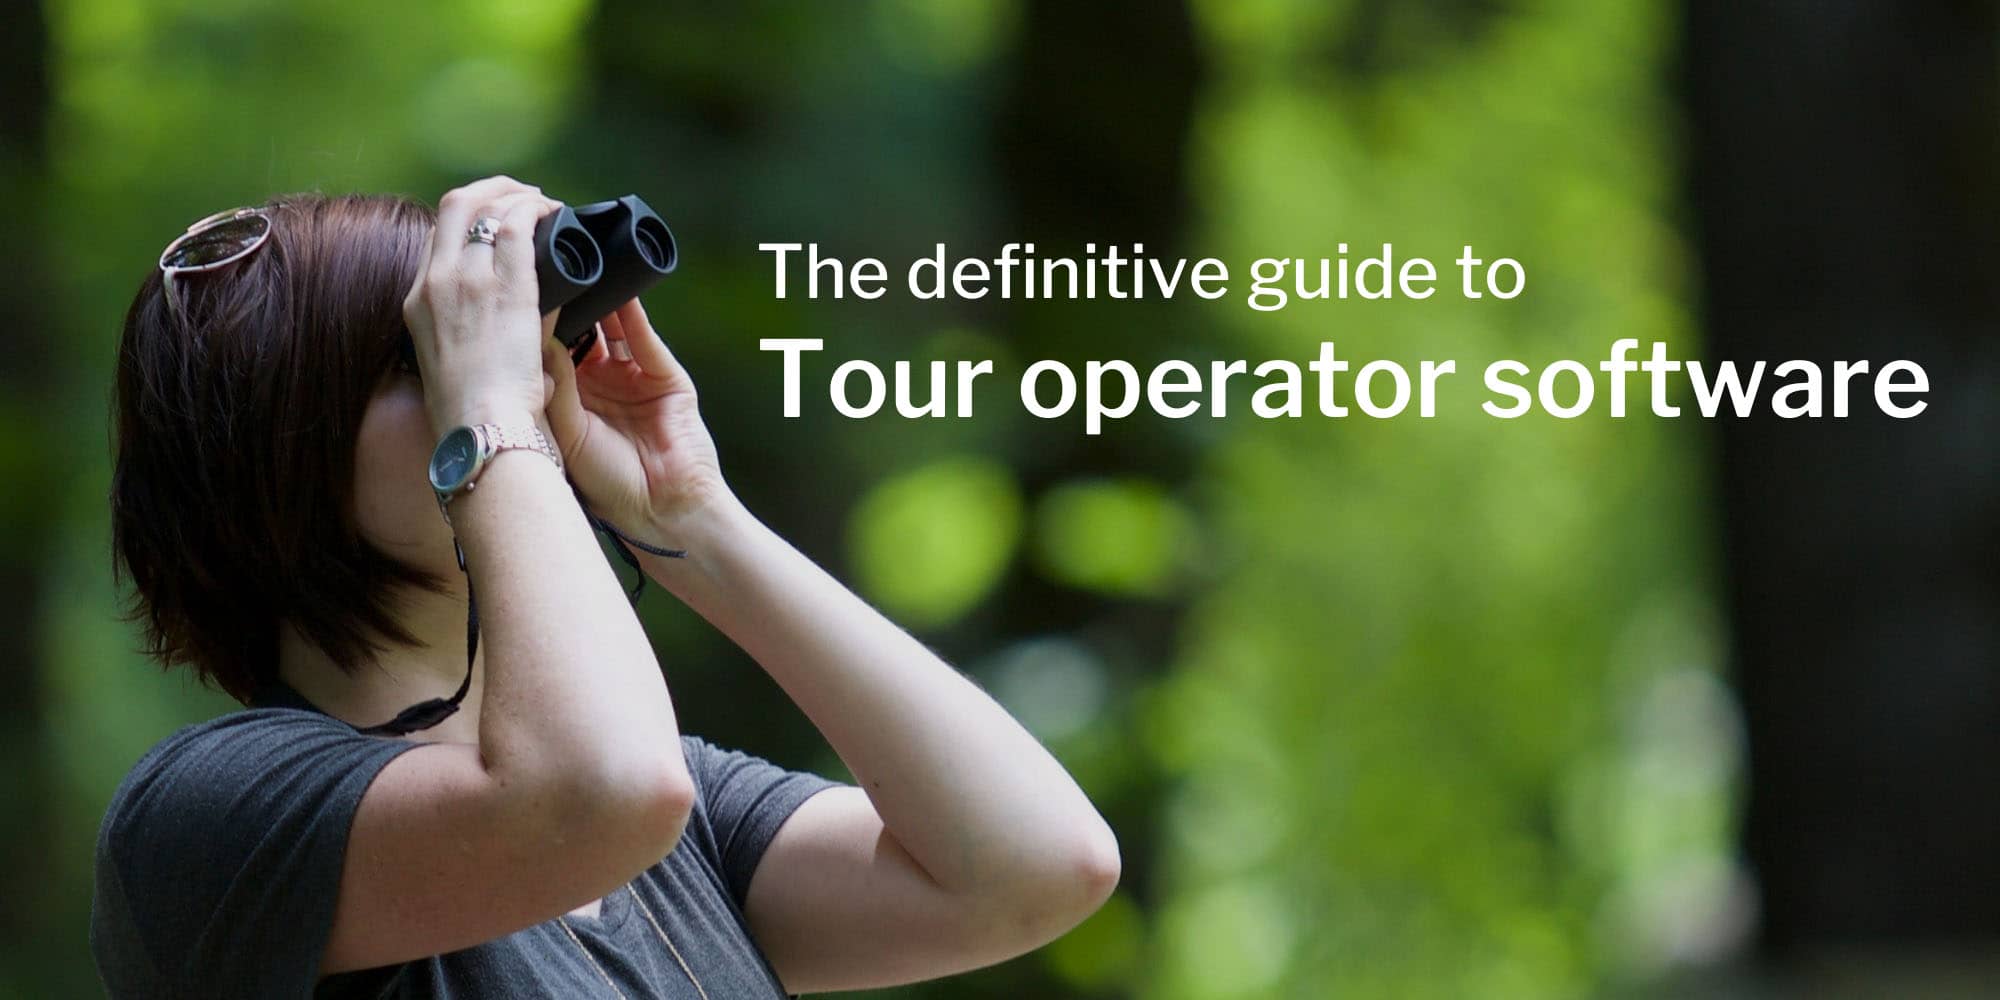 The definitive guide to tour operator software